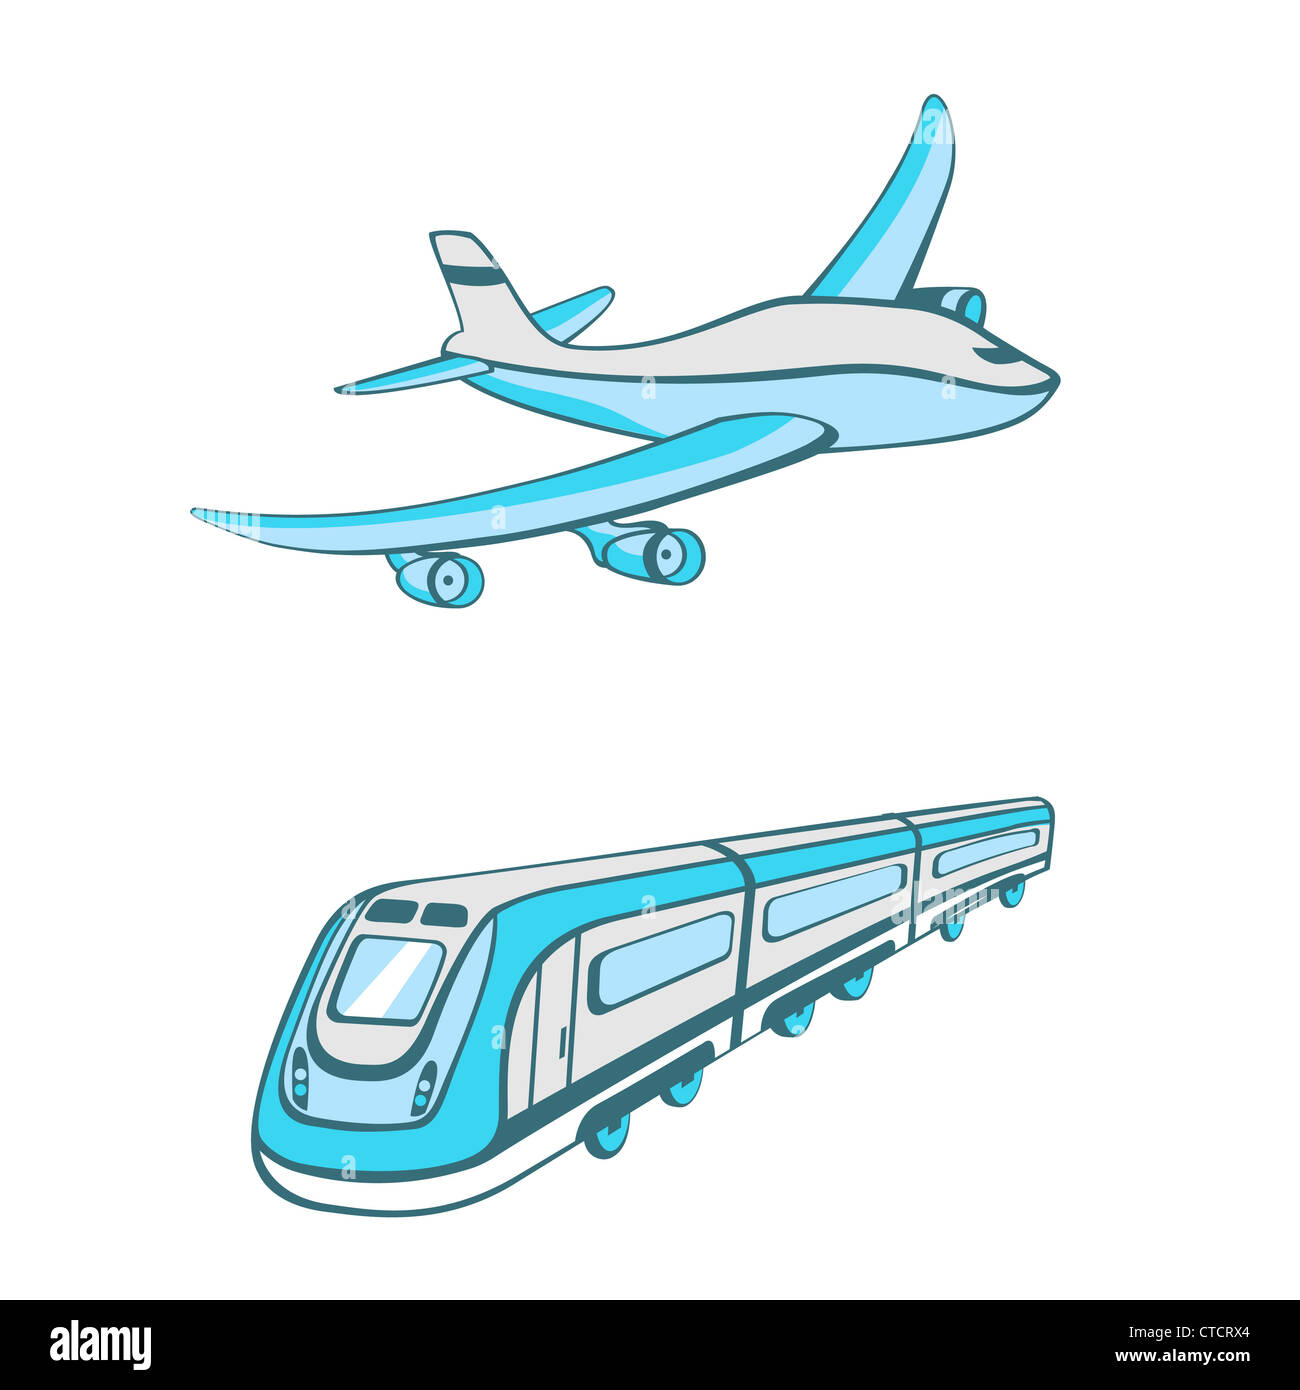 modes of transport clipart